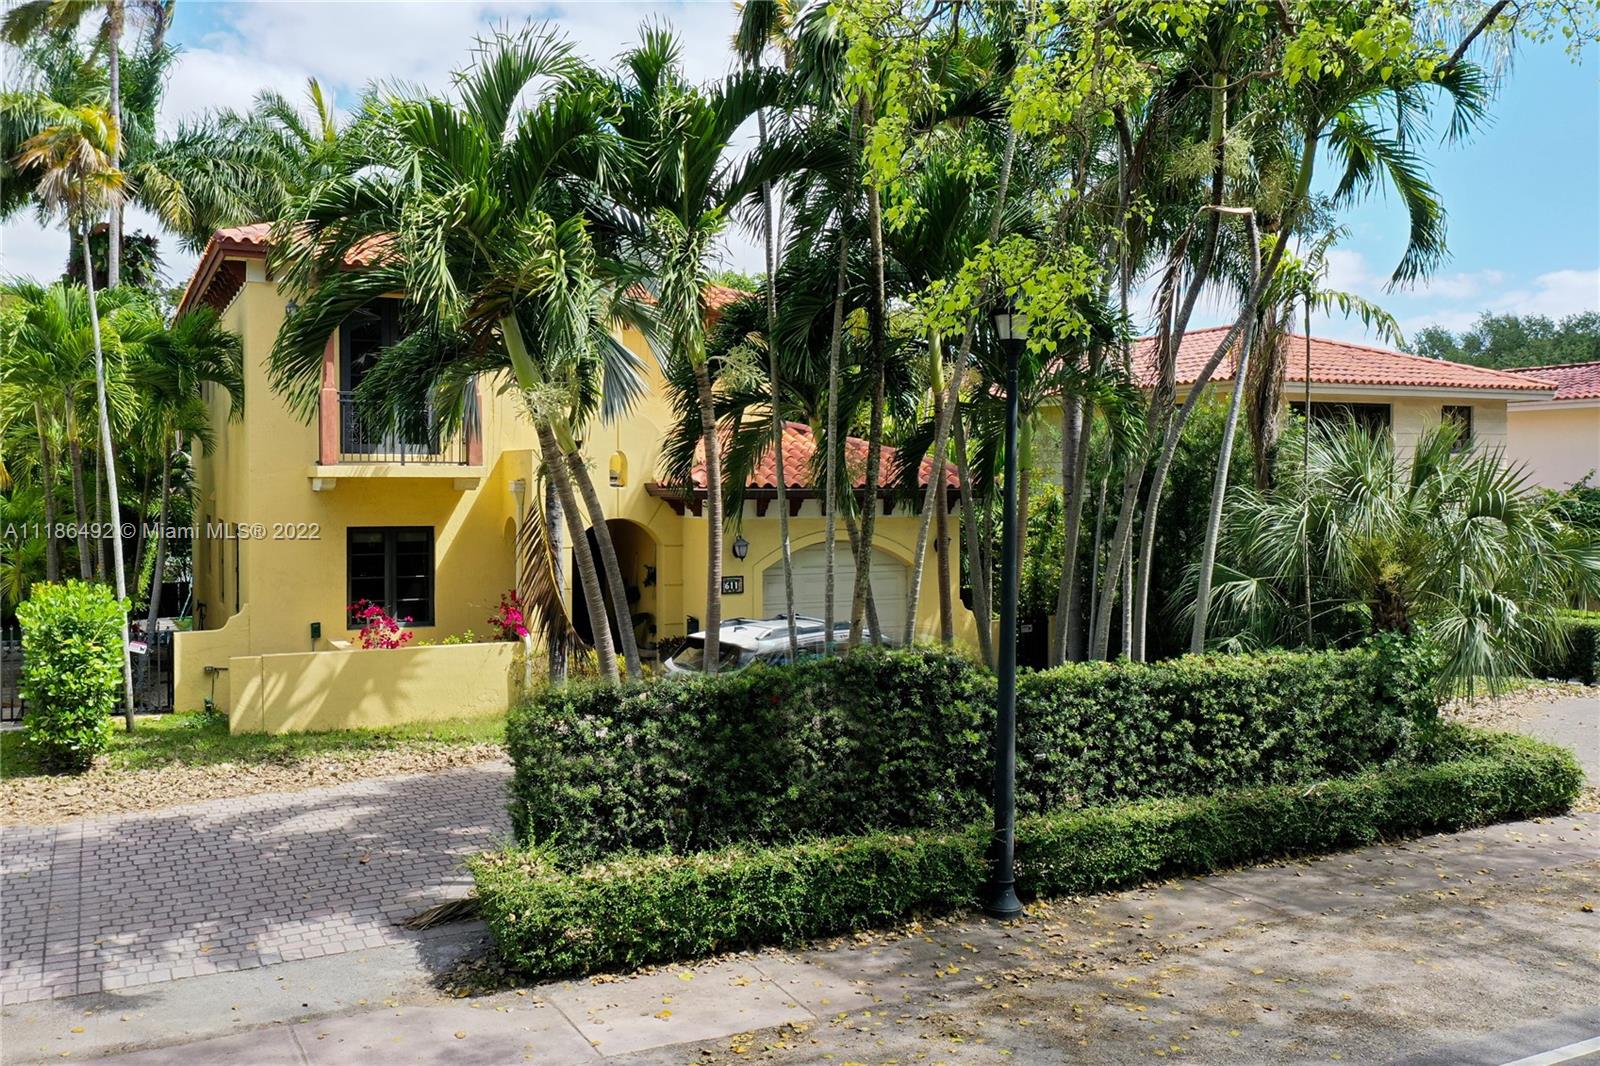 This Coral Gables gem has marble floors throughout. As soon as you walk inside, you are greeted by a large living and dining space. Downstairs you will find a kitchen with modern appliances that overlooks an additional family room, a bedroom ideal for a home office or guest bedroom, and a full size bathroom. Upstairs the bedrooms have access to an oversized terrace that overlooks the pool and garden with one room opening to a private balcony. Outside you'll find the perfect entertainment area with a covered outdoor kitchen with a built-in grill, pool, and garden. With a one car garage and a paved driveway, you can easily accommodate up to 4 cars. Complete with impact windows and doors throughout. Don't miss out! This one will go fast!